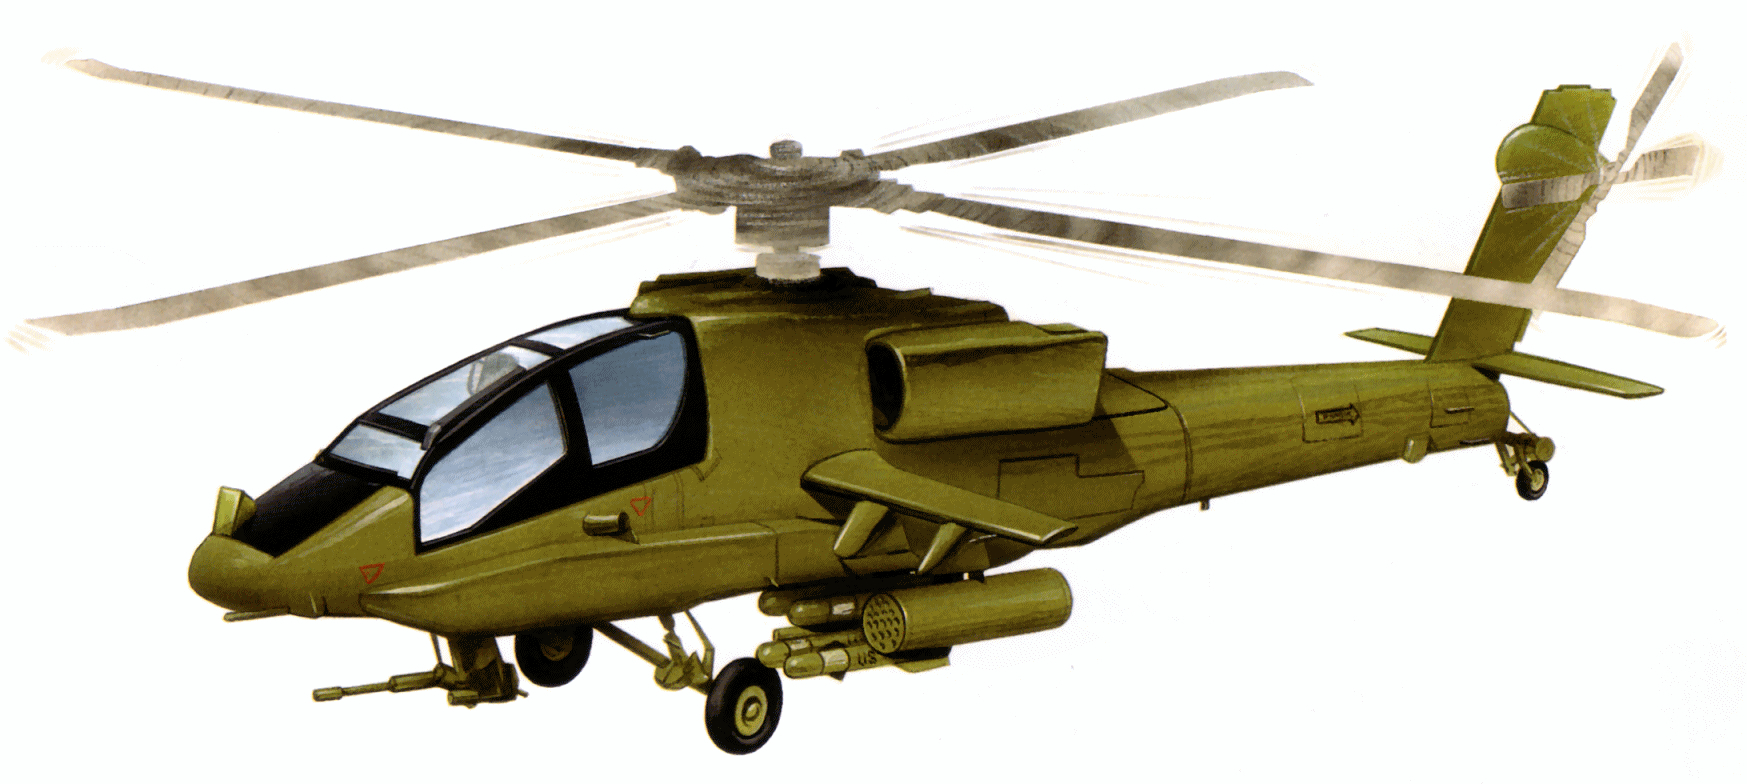 clipart of helicopter - photo #25